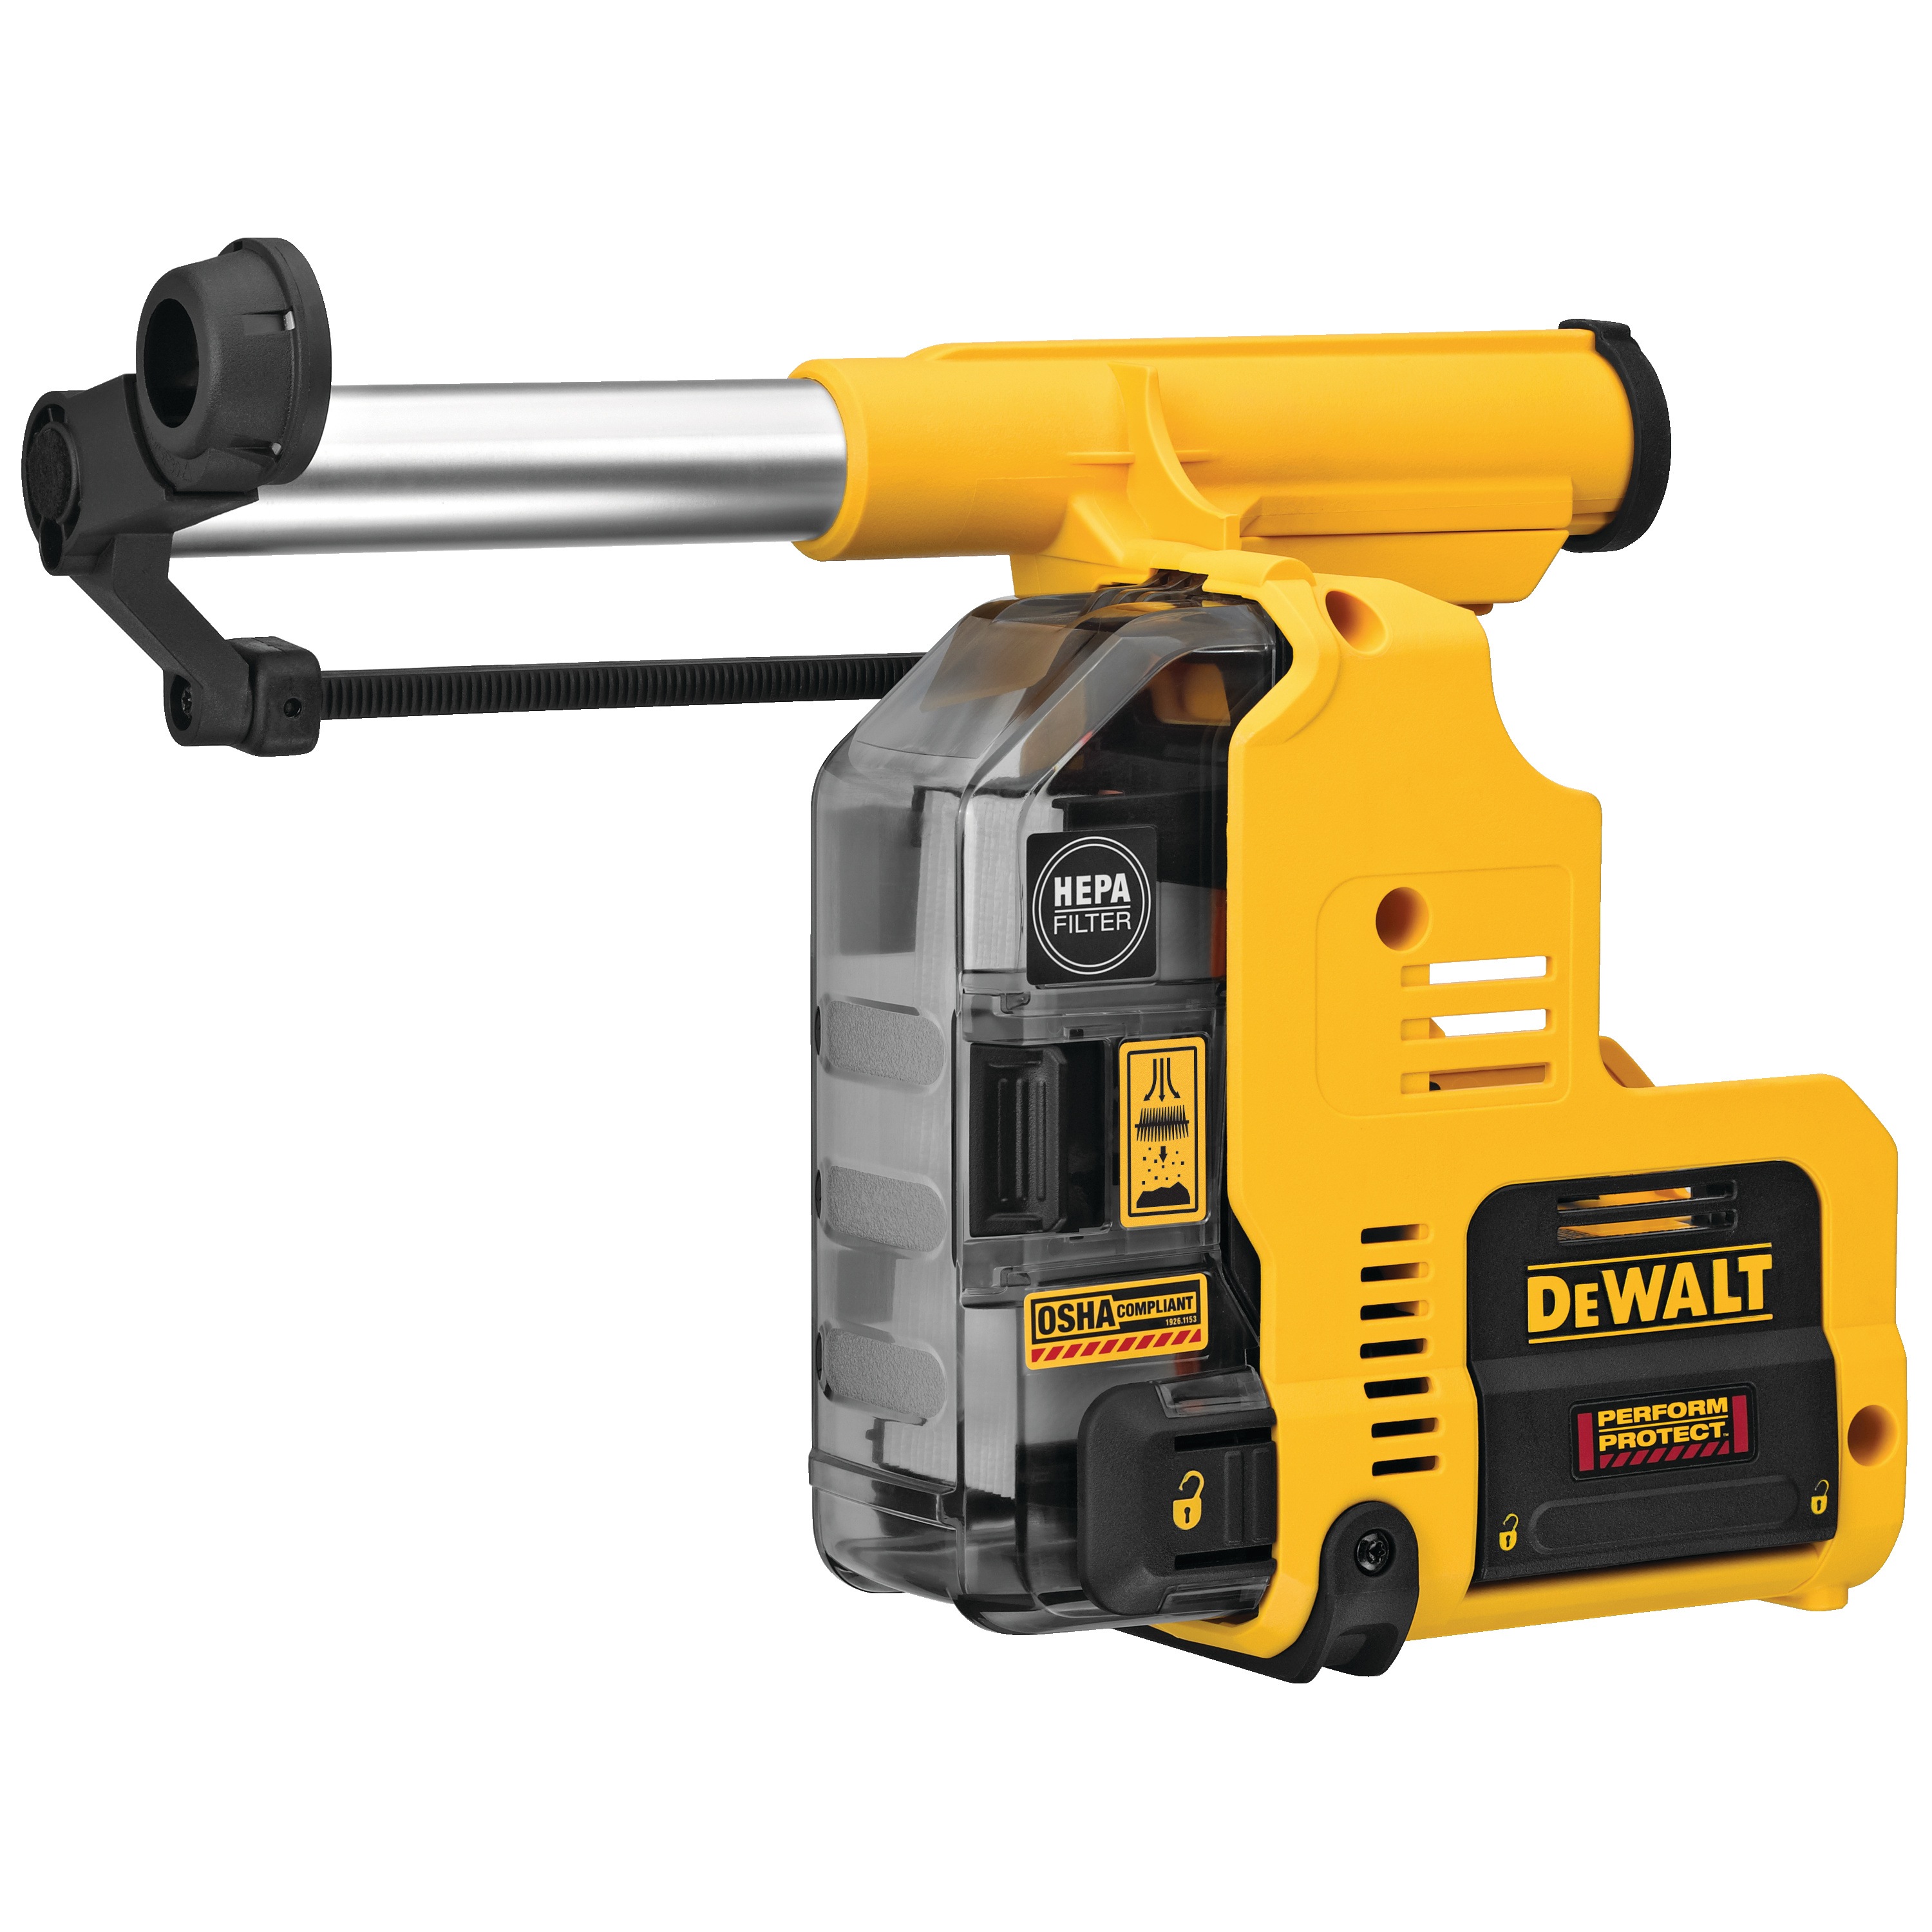 DEWALT D25300DH Dust Extraction System With HEPA Filter for sale online